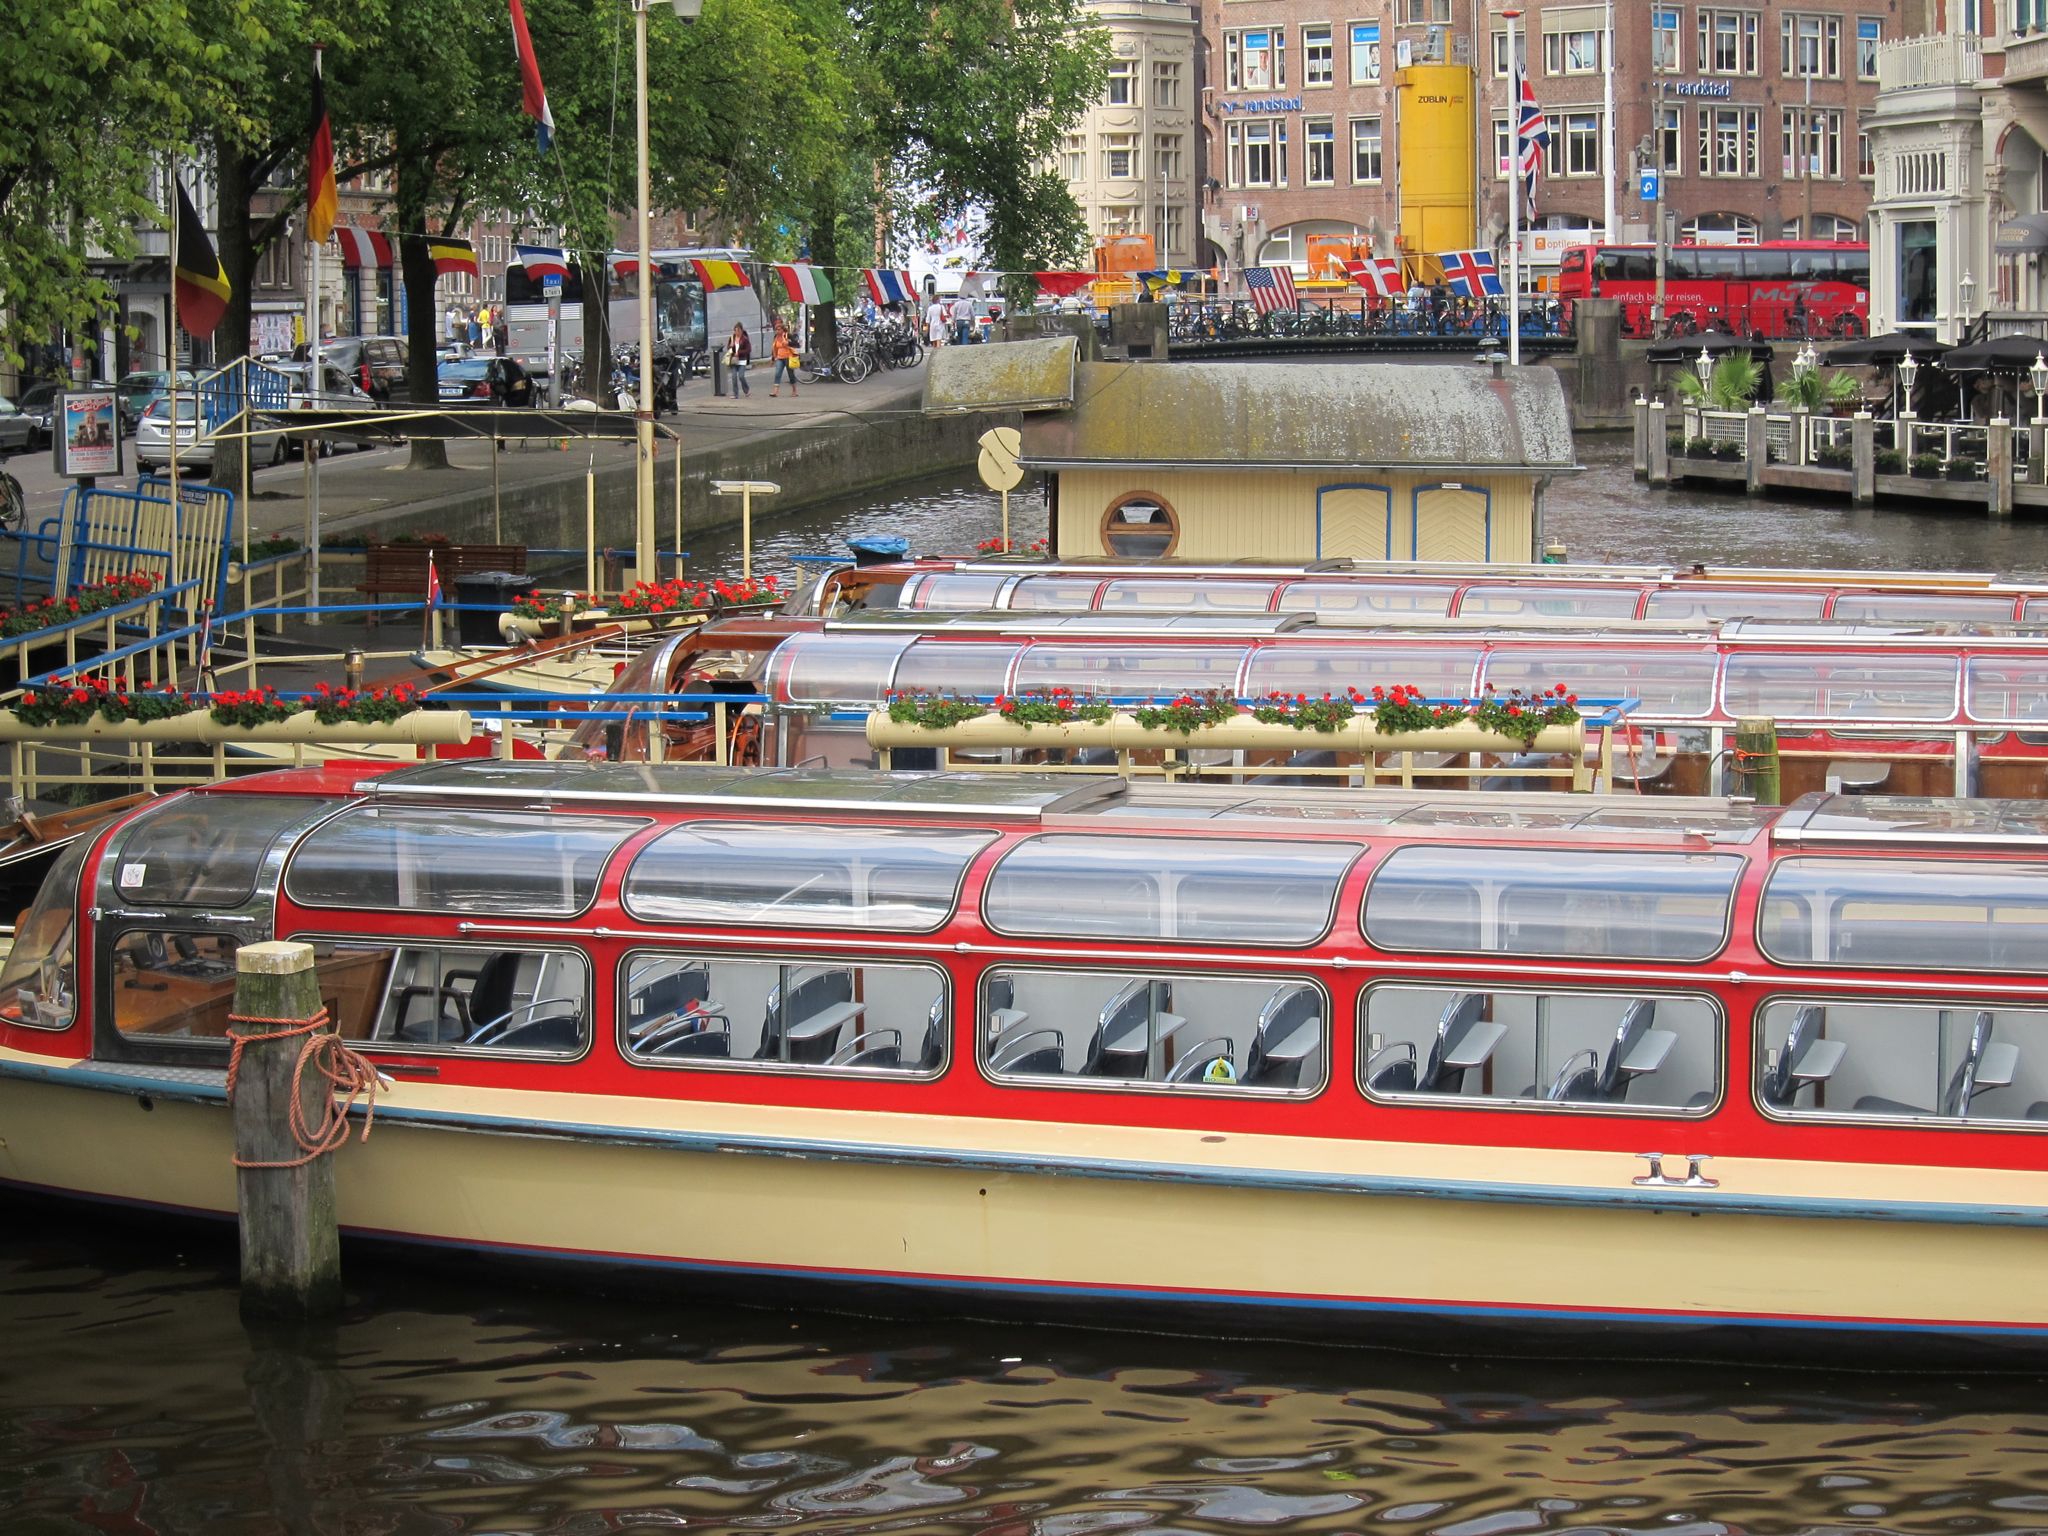 Photo 2 of 90 from the album Highlights Amsterdam 2012.